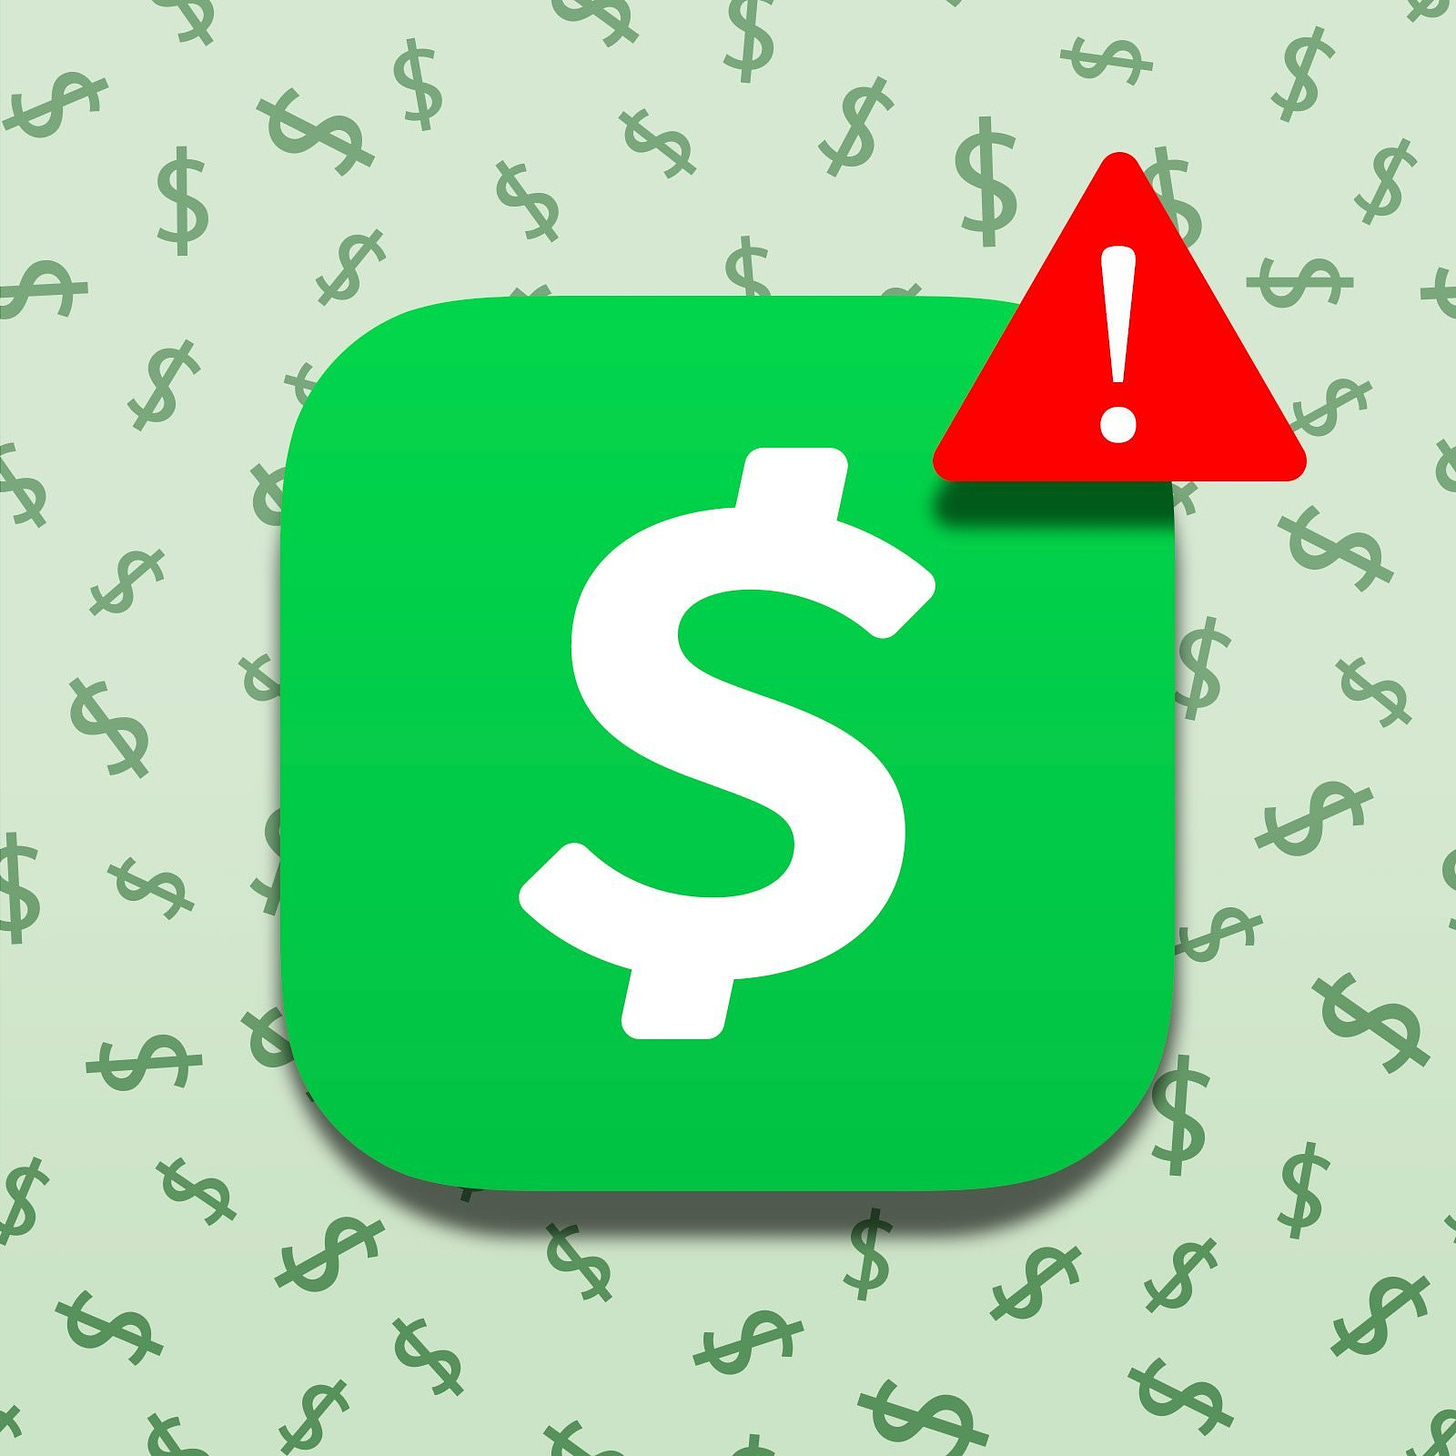 10 Common Cash App Scams You Need to Know About in 2022